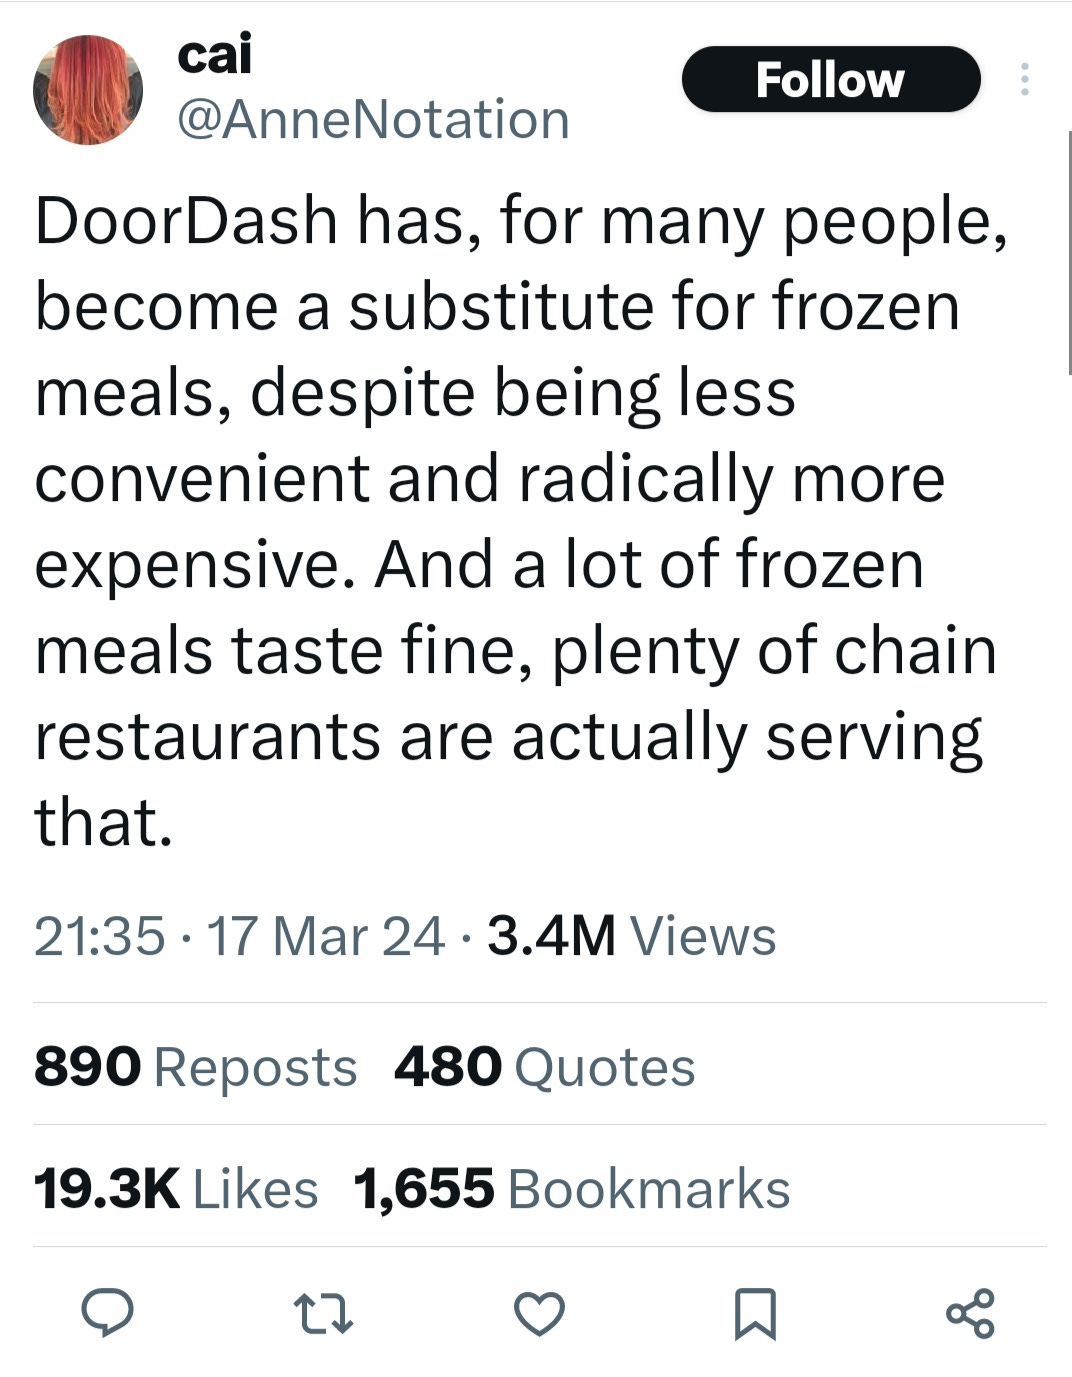 Screenshot of a tweet. The tweet reads “DoorDash has, for many people, become a substitute for frozen meals, despite being less convenient and radically more expensive. And a lot of frozen meals taste fine, plenty of chain restaurants are actually serving that.”